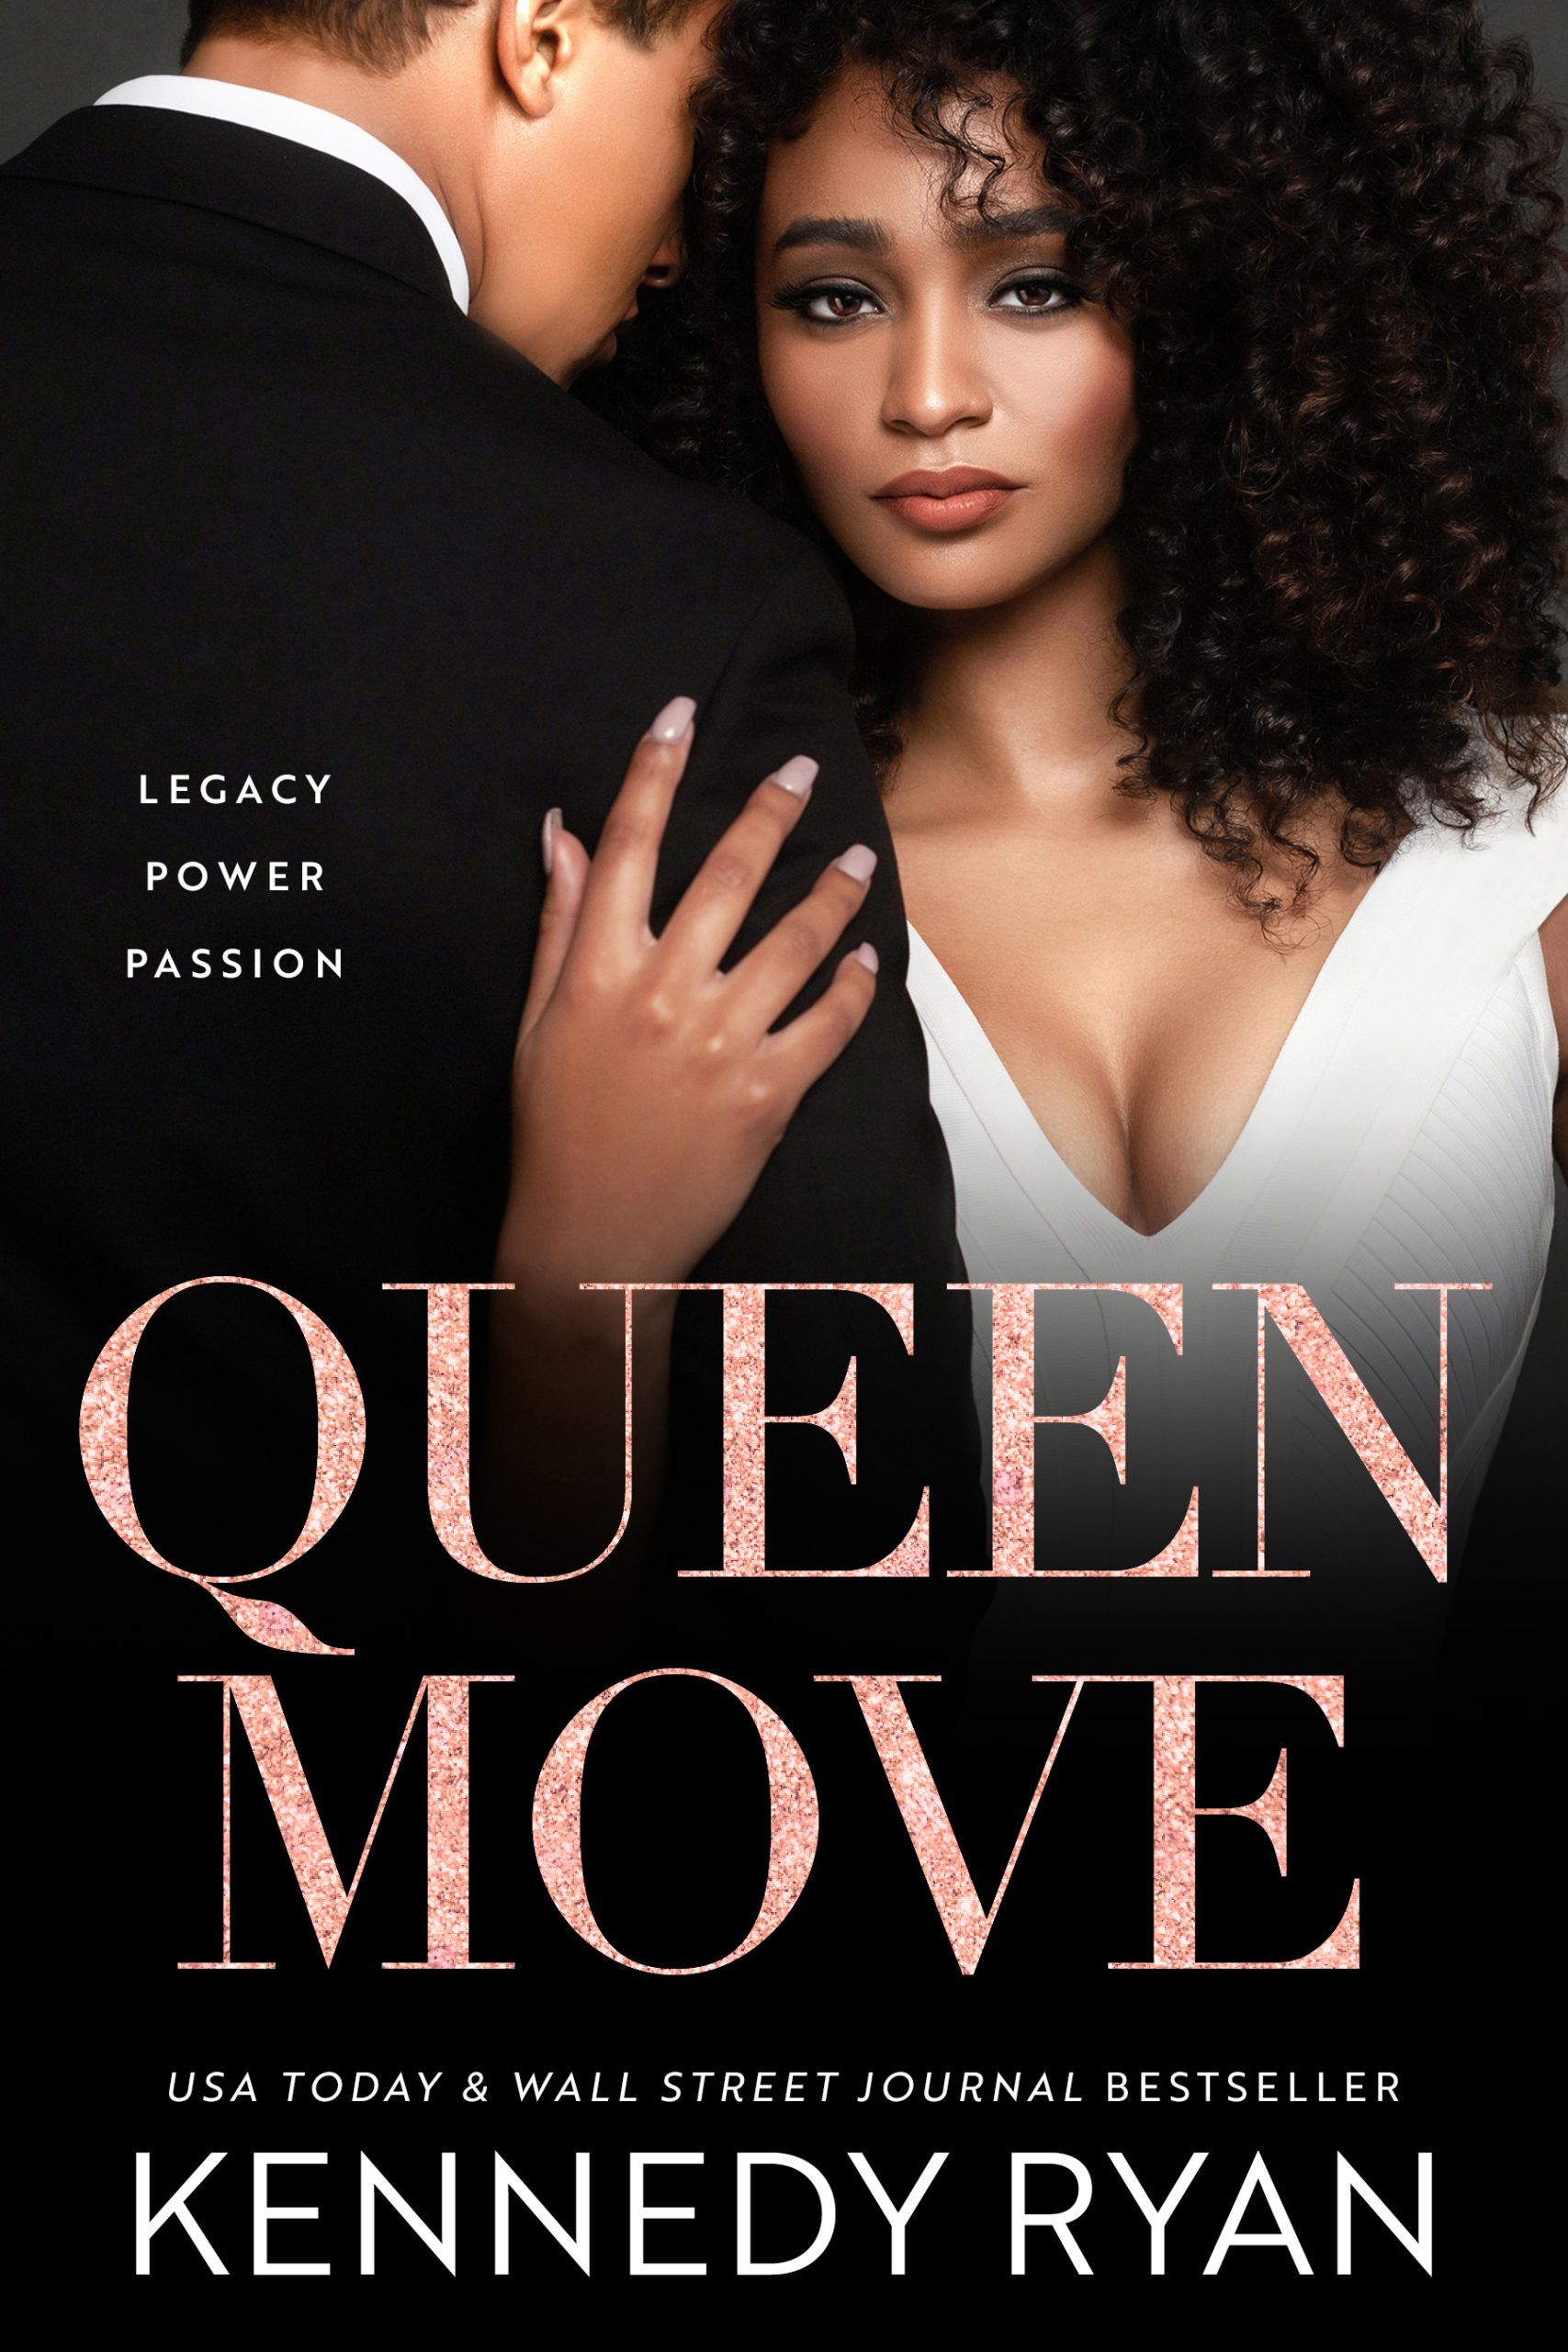 Cover of Queen Move about a political consultant working for social change